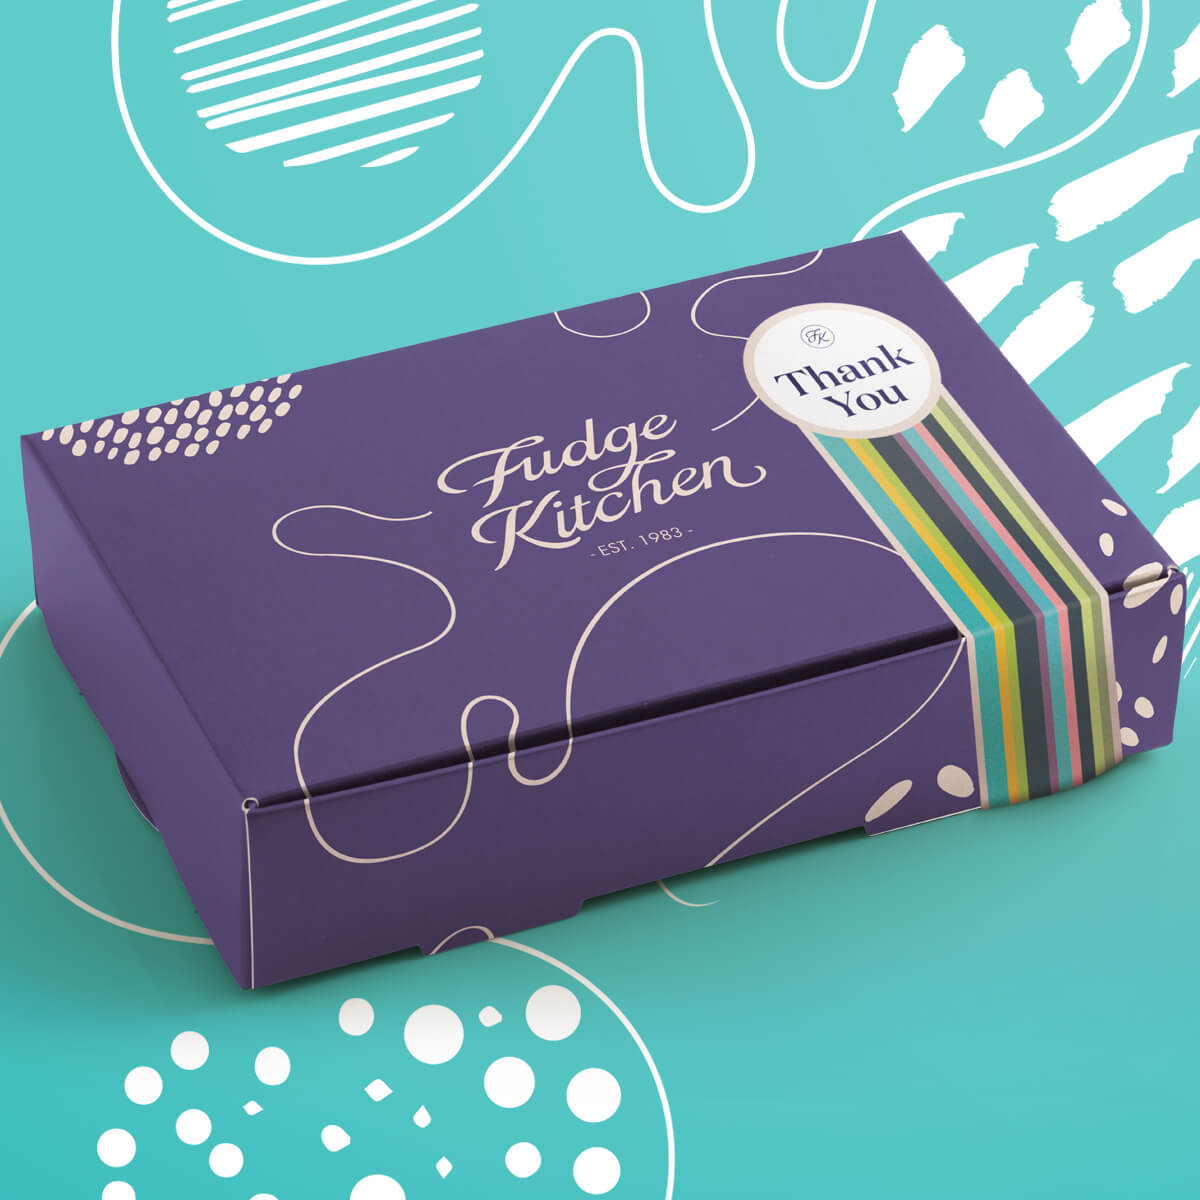 Butter fudge gift box with 'thank you' band